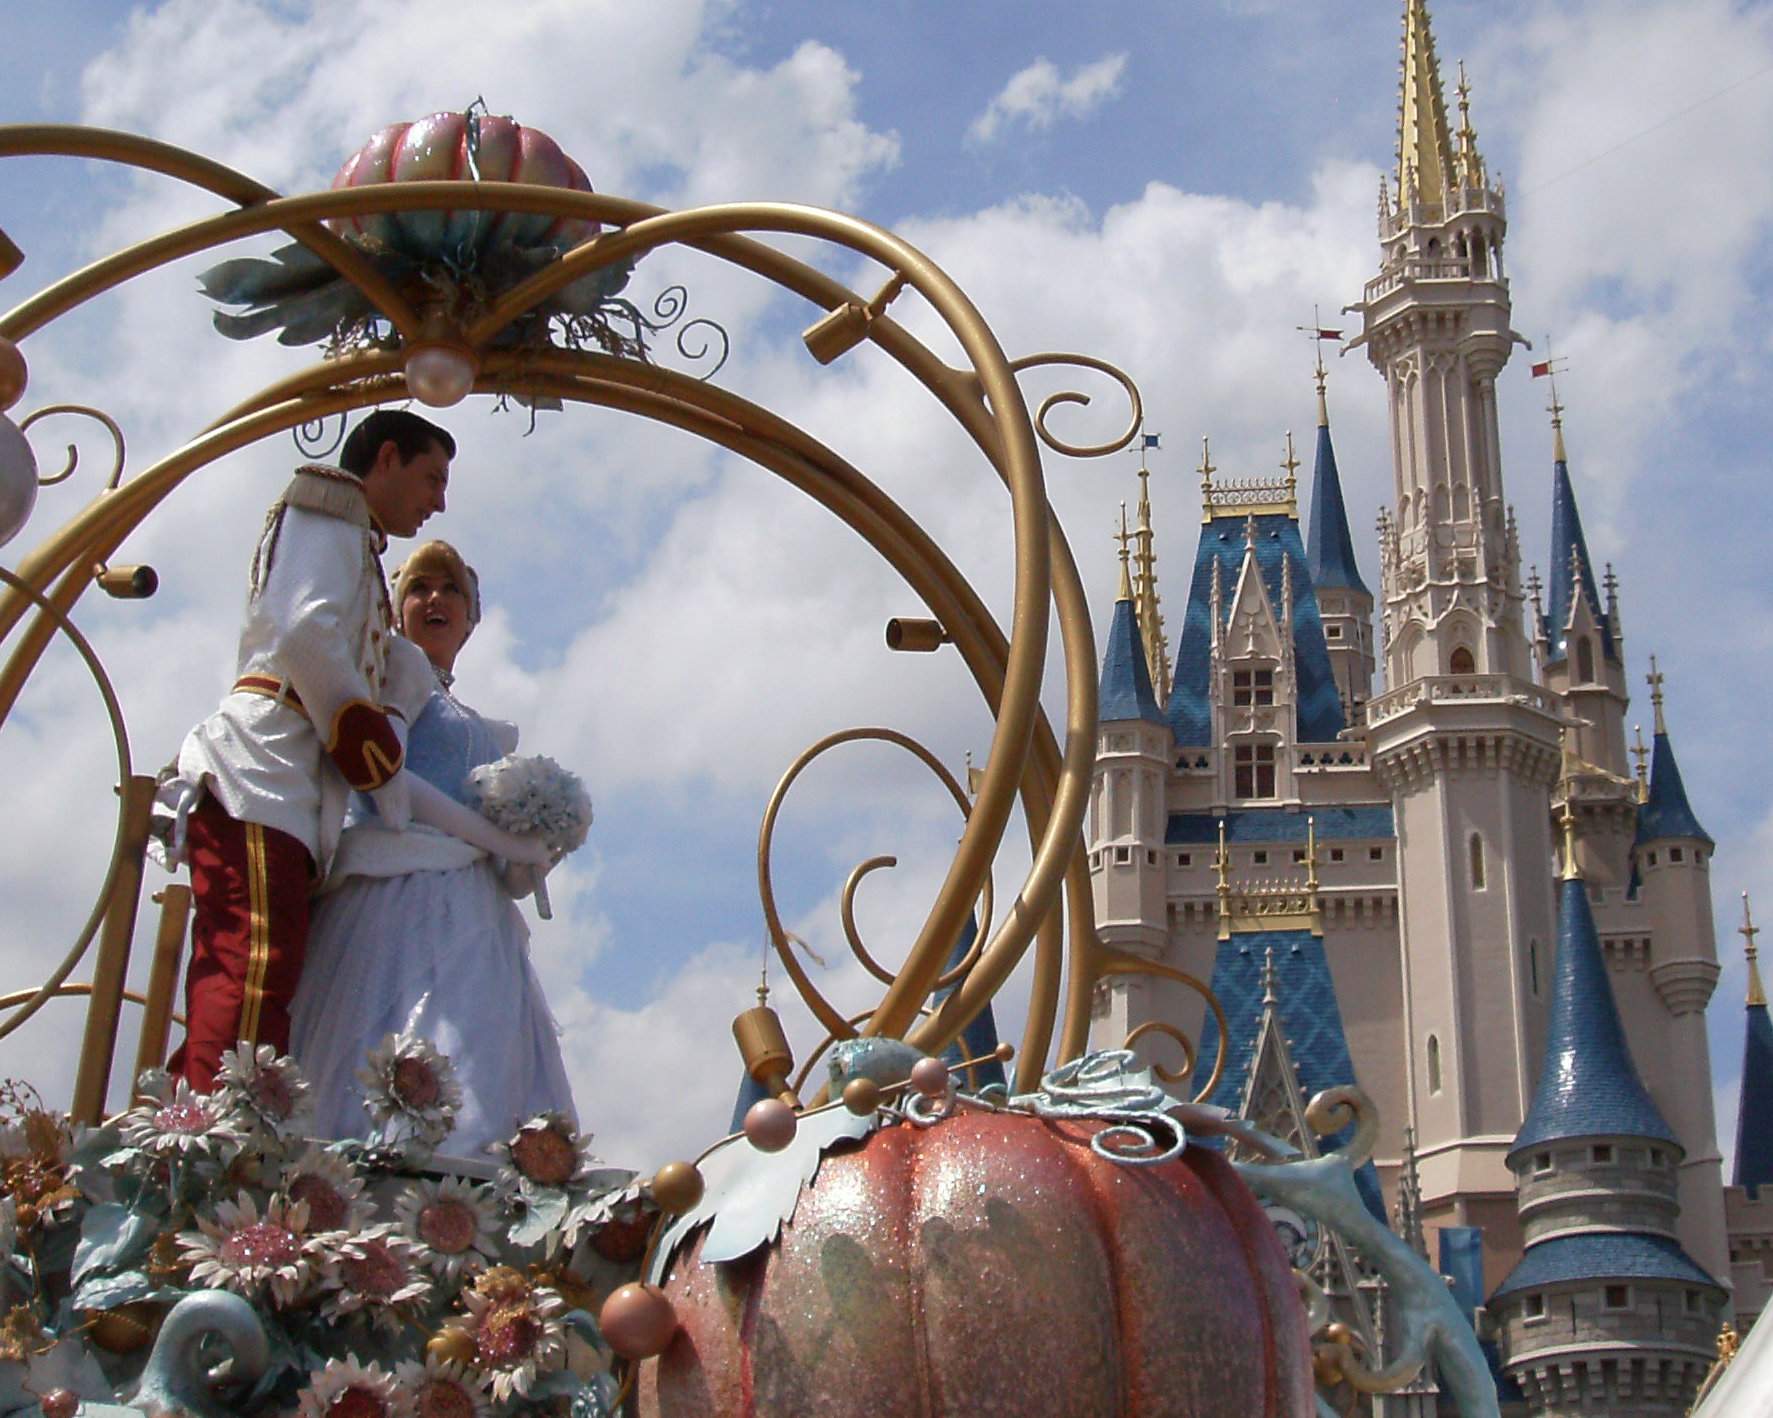 Parade - Cinderella and Prince Charming in front of Castle